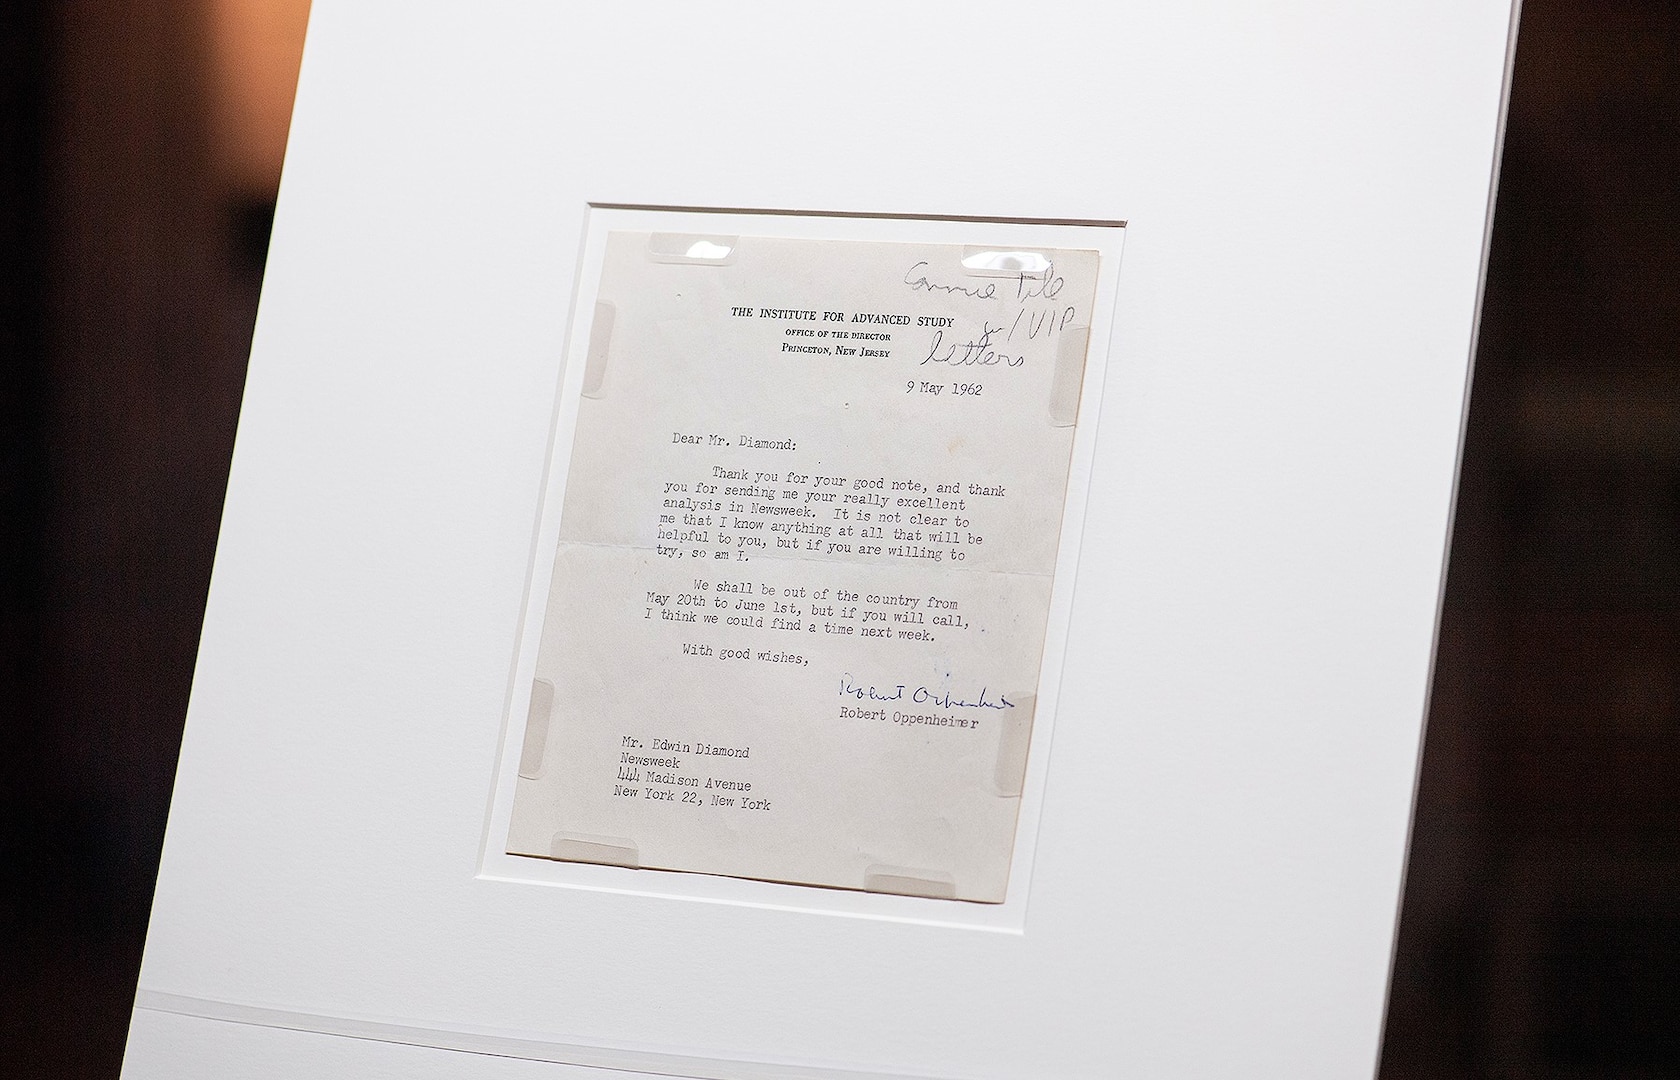 Through September, the National Cryptologic Museum is featuring artifacts from the early Atomic Age, including a letter from American physicist J. Robert Oppenheimer to Newsweek editor Edwin Diamond.